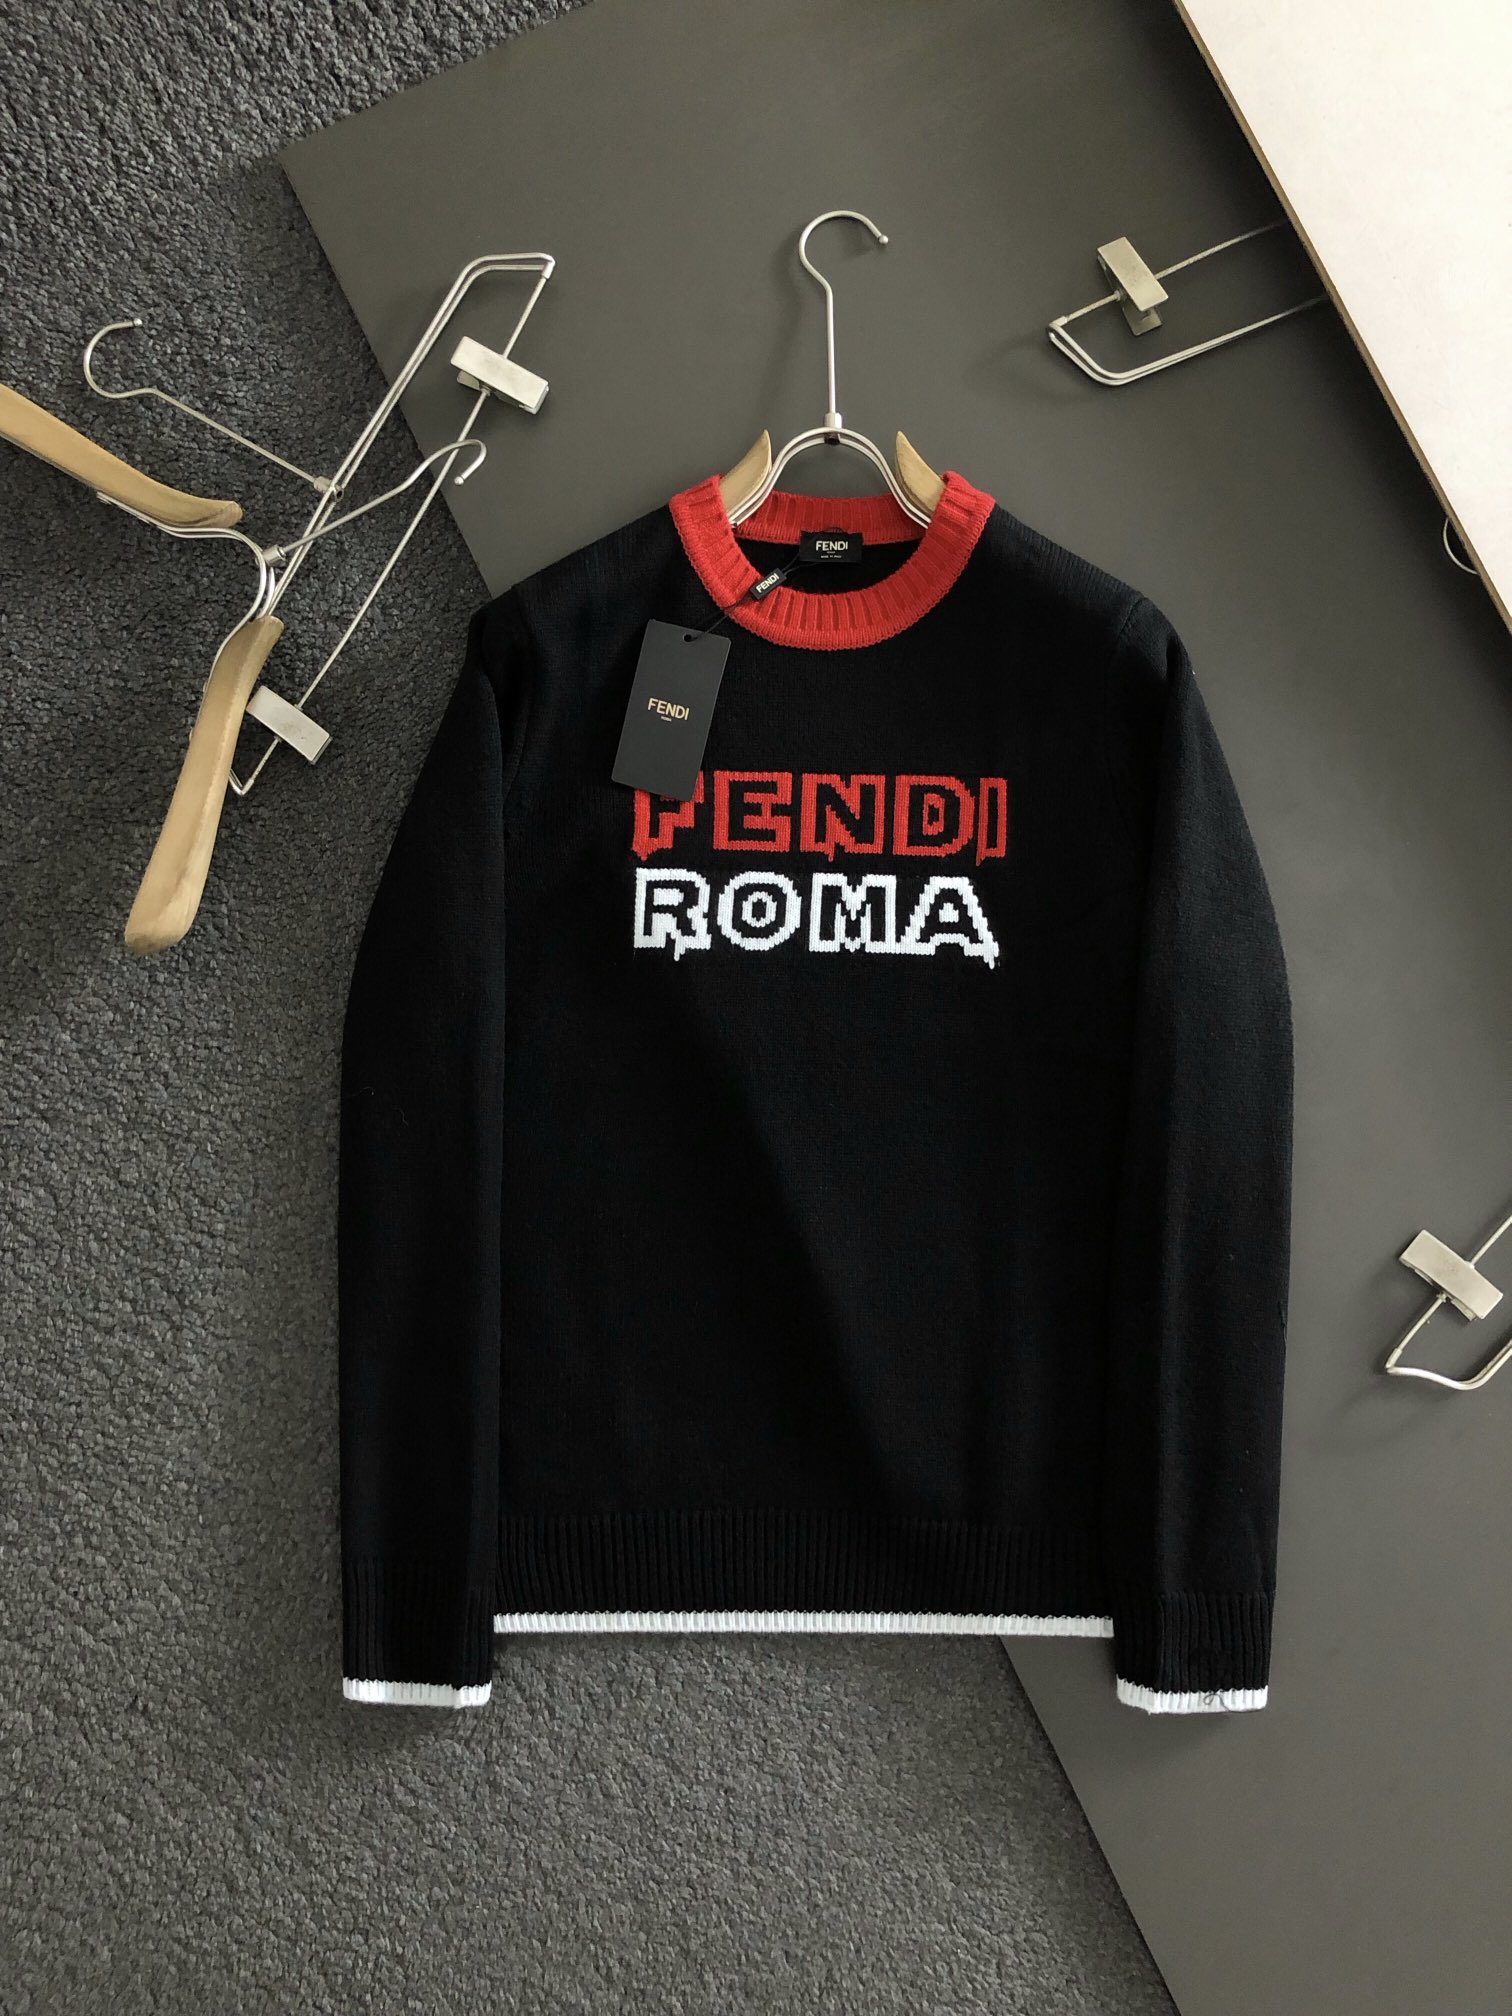 Fendi Clothing Knit Sweater Black Red Knitting Fall Collection Fashion